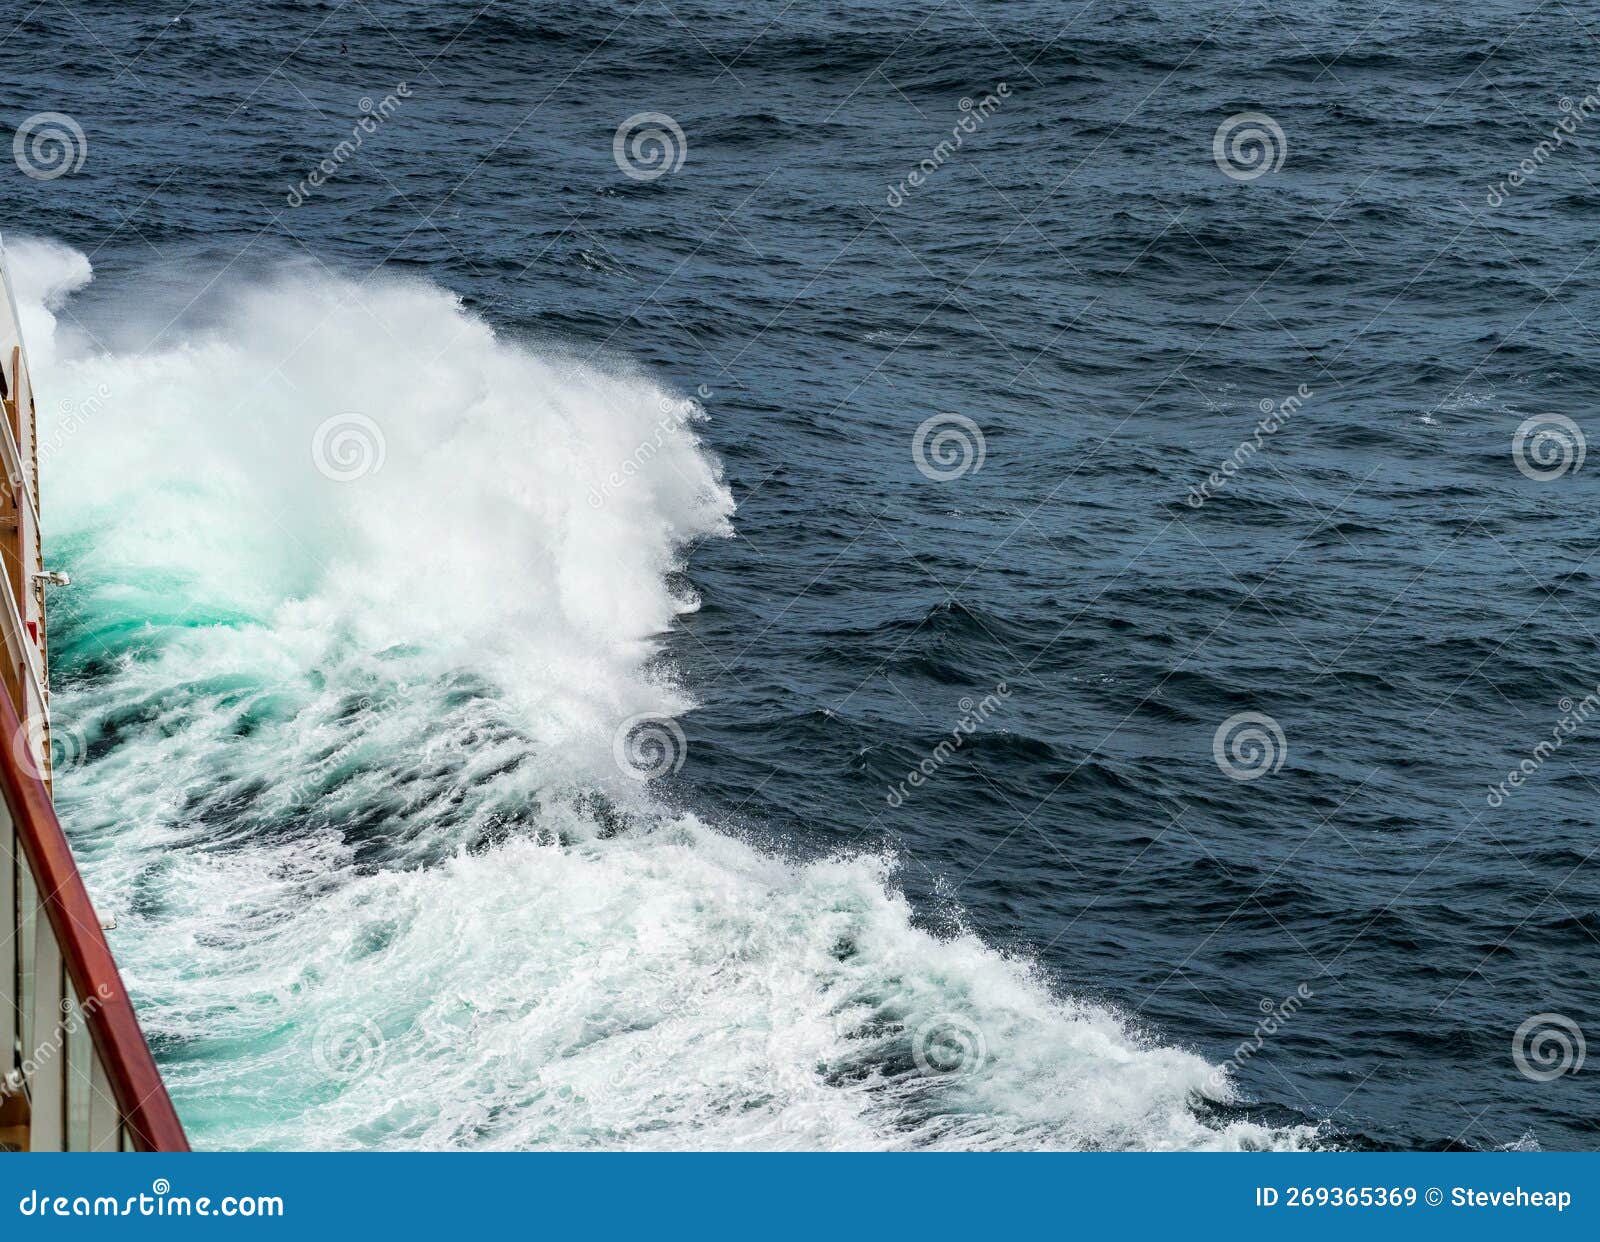 cruise ship in large swell